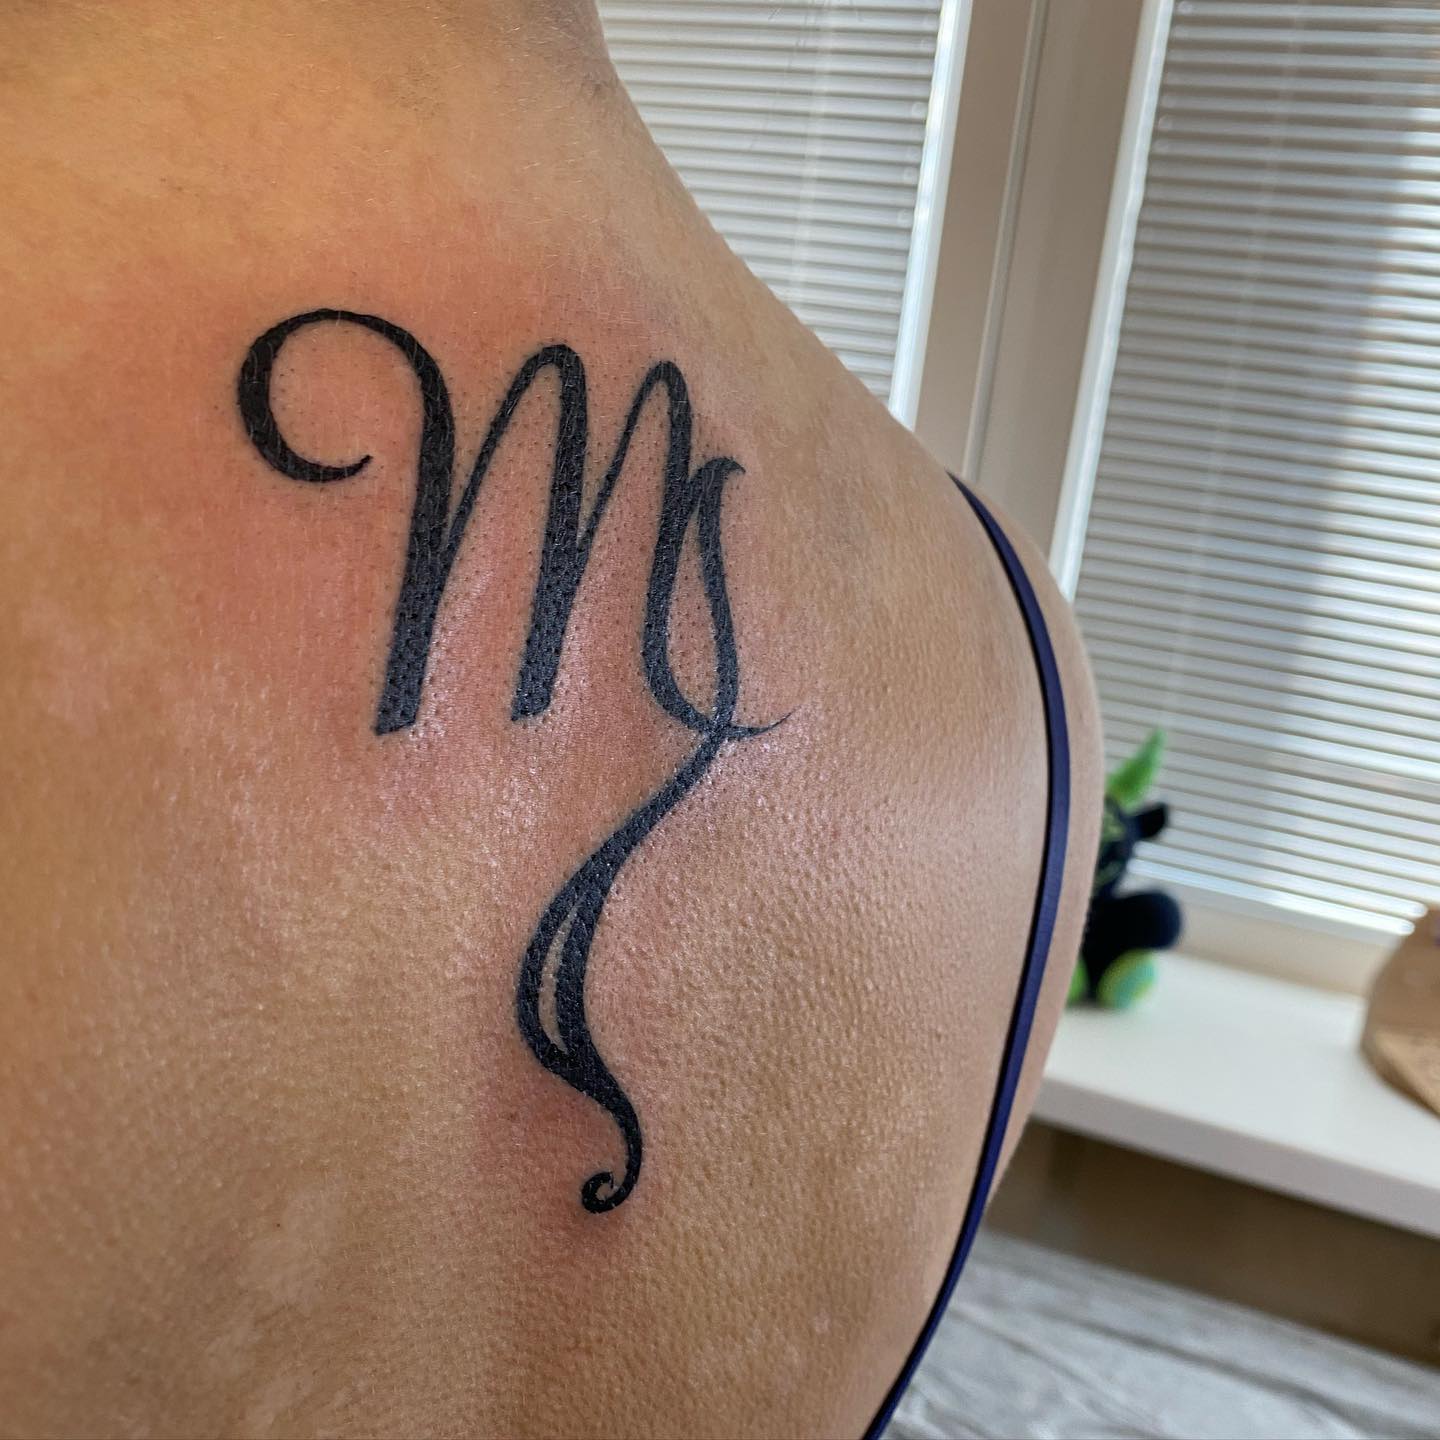 Here is an another Virgo sign tattoo on back. The line that grows longer downwards helps this tattoo achieve an elegant look.